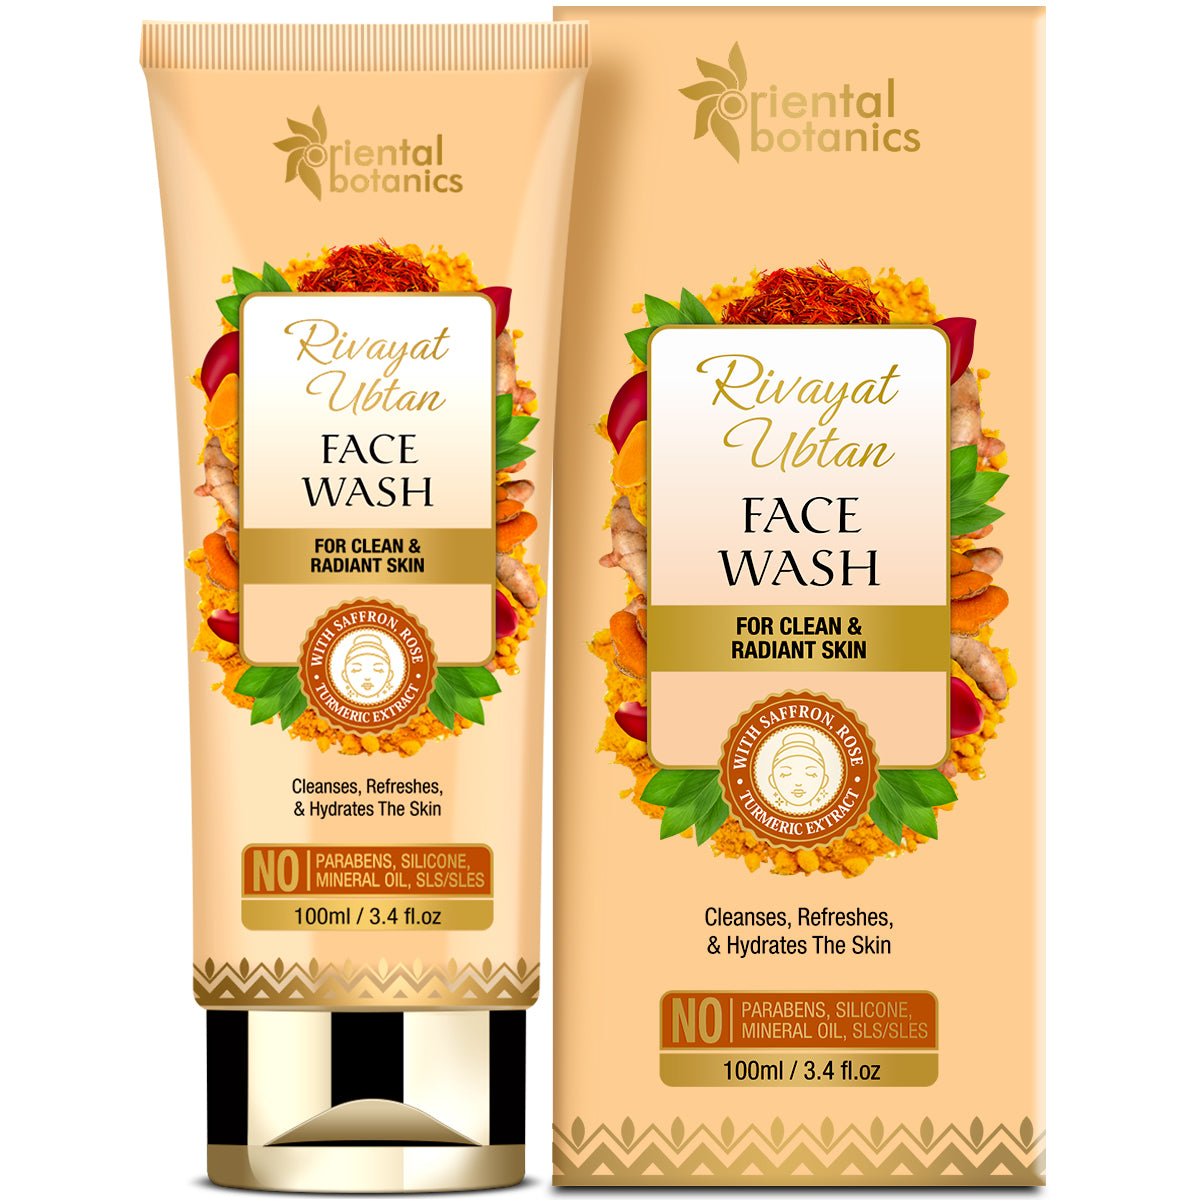 Oriental Botanics Rivayat Ubtan Face Wash For Clean and Radiant Skin - With Saffron, Rose and Turmeric Extract - No Parabens, Silicone, Mineral Oils, 100 ml